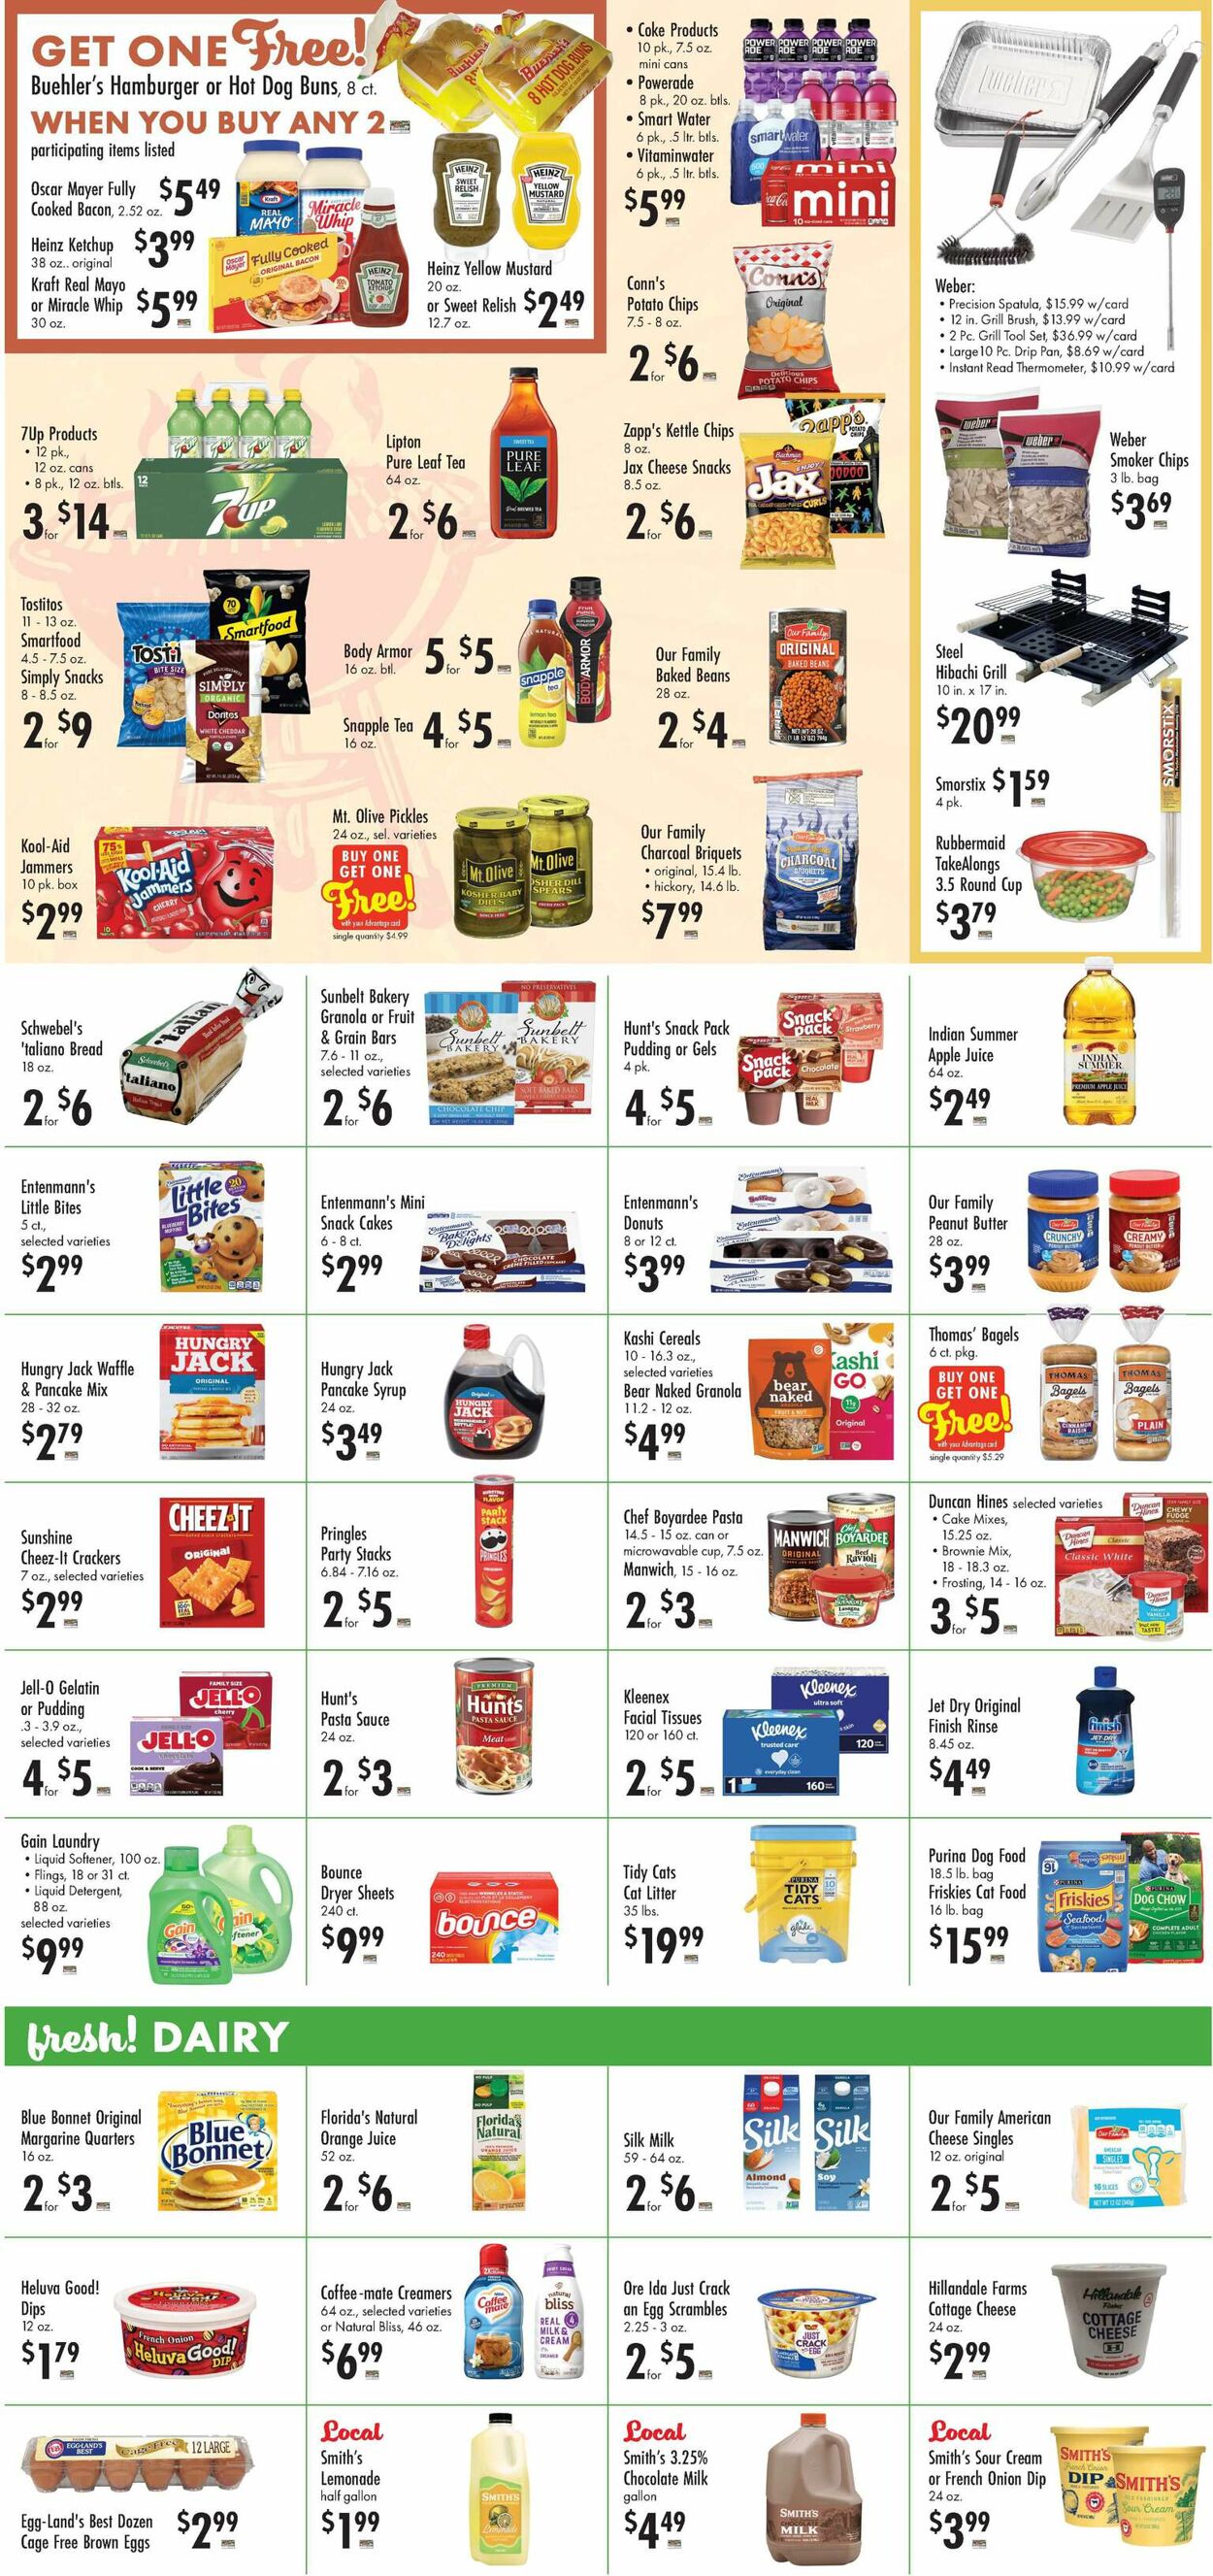 Catalogue Buehler's Fresh Foods from 05/15/2024